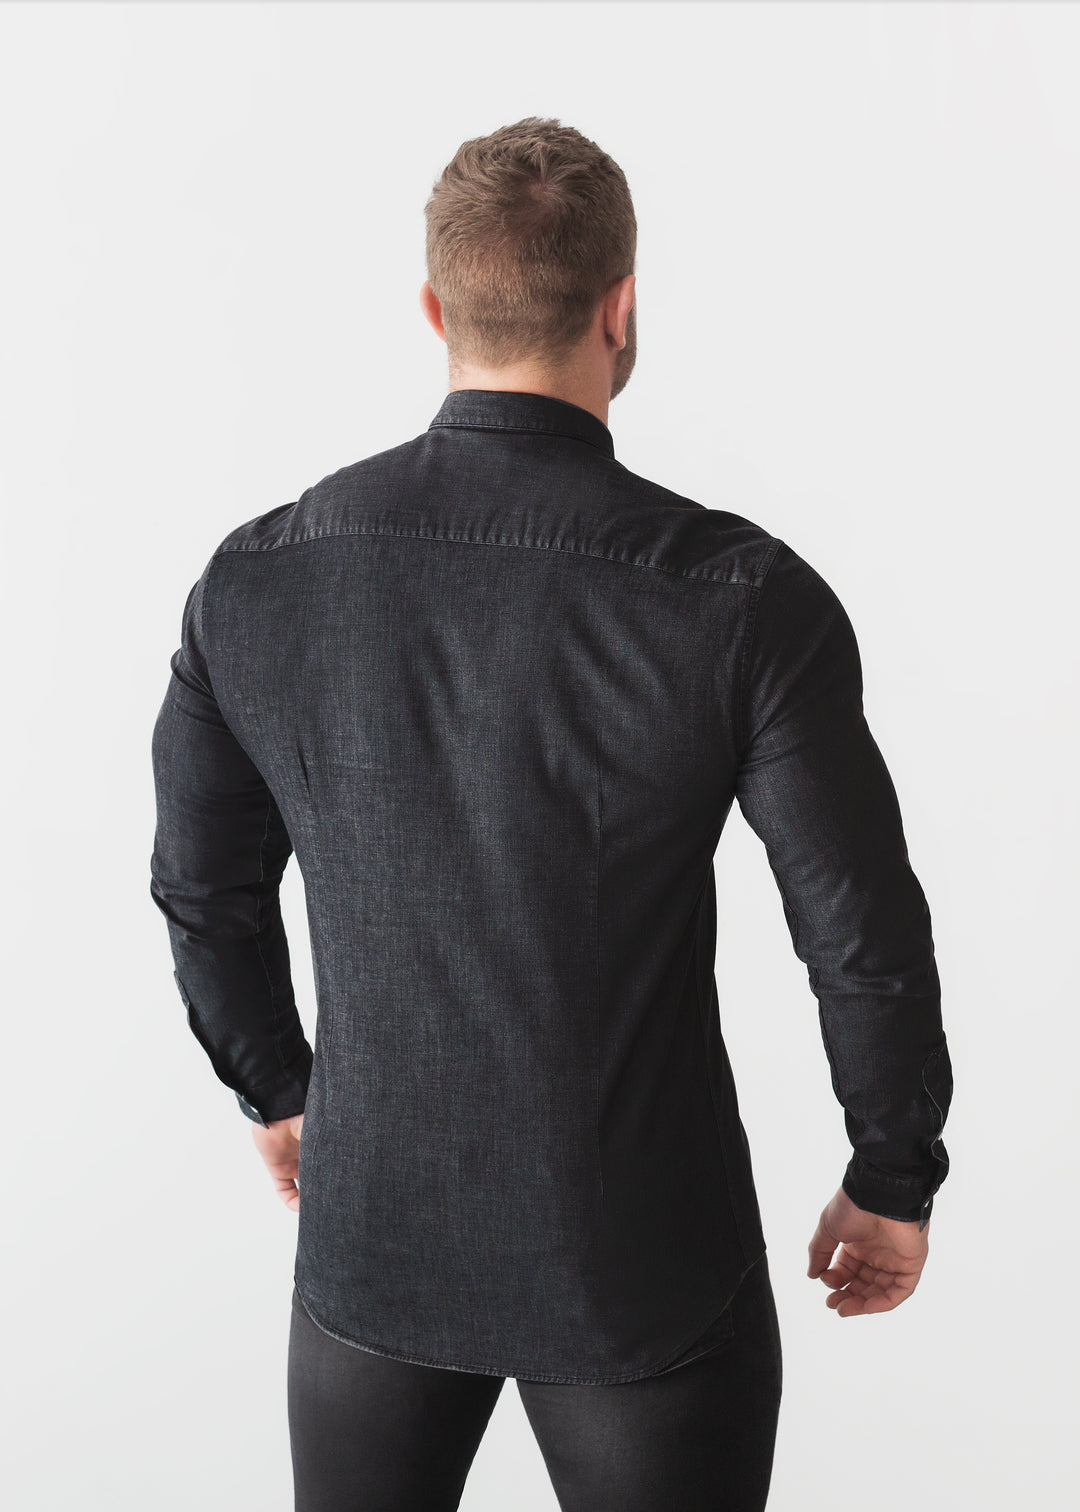 Black Denim Tapered Fit Shirt Back. A Proportionally Fitted and Comfortable Muscle Fit Shirt. Ideal for bodybuilders.